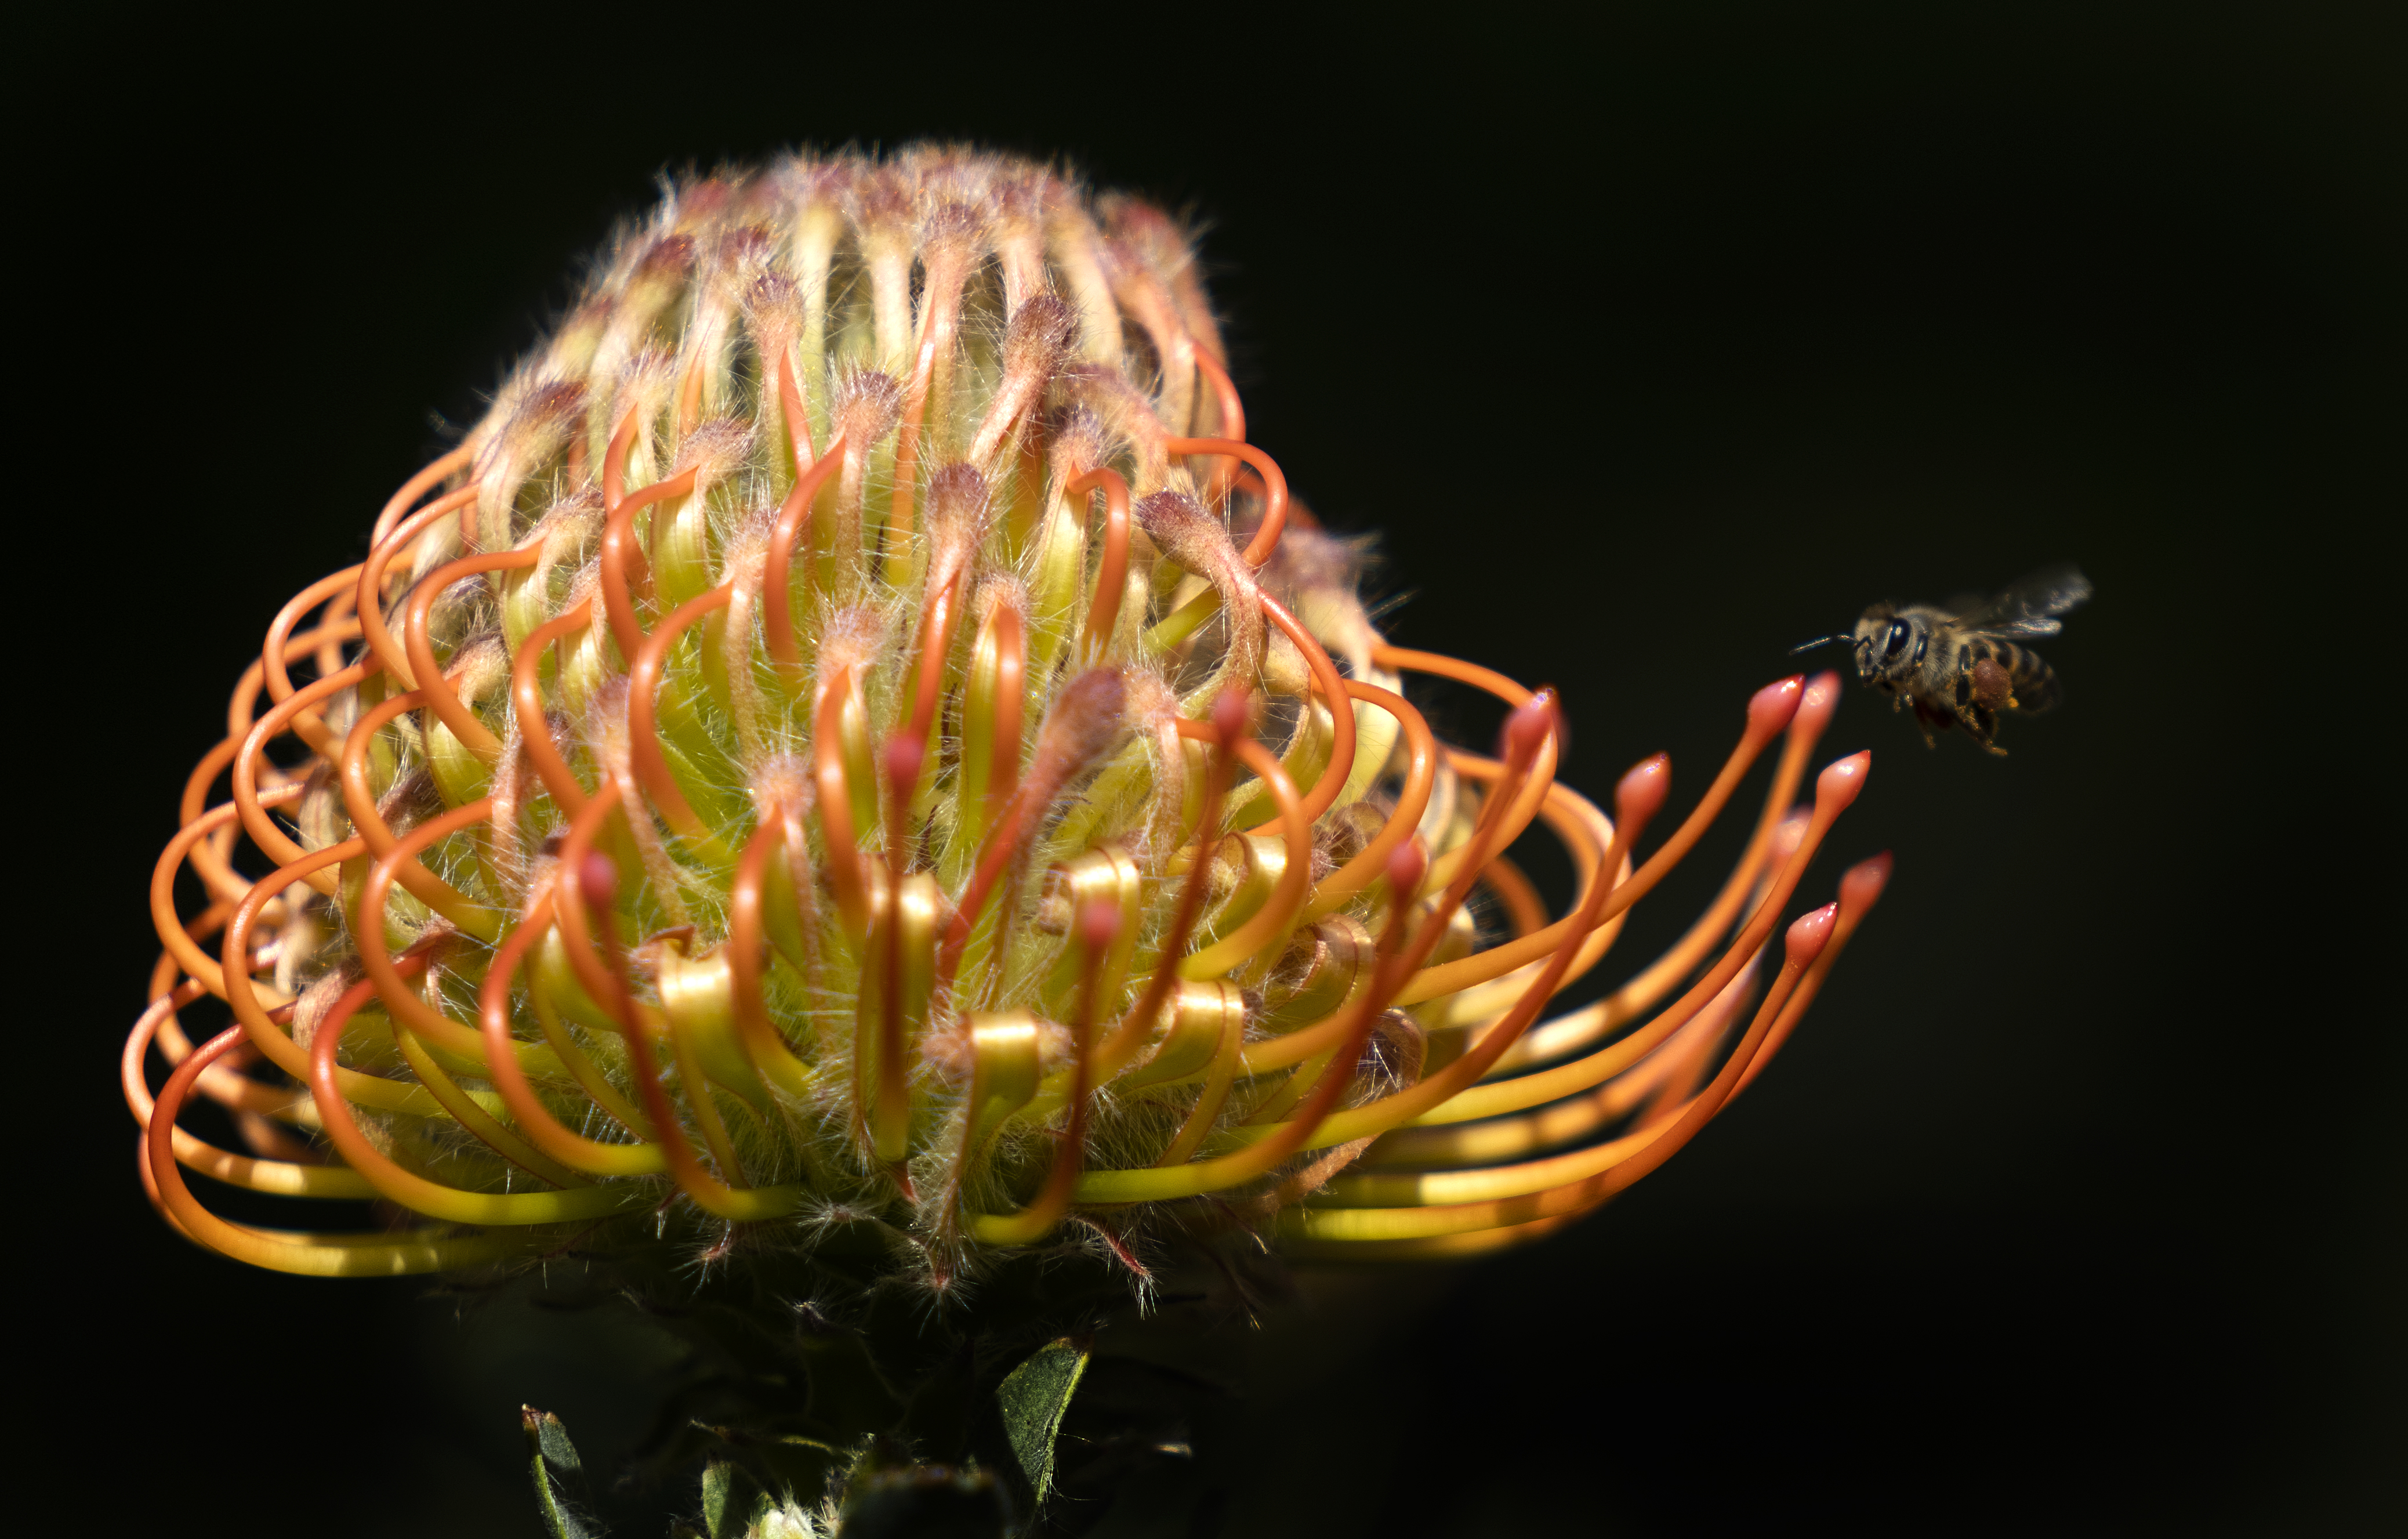 epa09545525 A bee approaches an indigeneous Pincushion Protea, Leucospermum Fynbos flower growing at the African National Biodiversity Institute's (SANBI) Kirstenbosch Botanical Garden in Cape Town, South Africa 24 October 2021(issued 25 October 2021). According to the Convention on Biological Diversity, it is now widely recognized that climate change and biodiversity are interconnected. Biodiversity makes an important contribution to both climate change mitigation and adaptation. Conserving and sustainably managing biodiversity is critical to addressing climate change. Established in 2004 the South African National Biodiversity Institute's (SANBI) mandate is to promote all aspects of biodiversity as a mitigation measure against climate change. In addition to managing the National Botanical and Zoological Gardens, SANBI plays a leadership role in generating, coordinating, and interpreting the knowledge and evidence required to support policies and decisions relating to all aspects of biodiversity. Environmental organizations have kept calling on world leaders to put more effort into addressing the effects of climate change as the UK prepares to host the 26th UN Climate Change Conference of the Parties (COP26) in Glasgow from 31 October to 12 November 2021. EPA-EFE/NIC BOTHMA